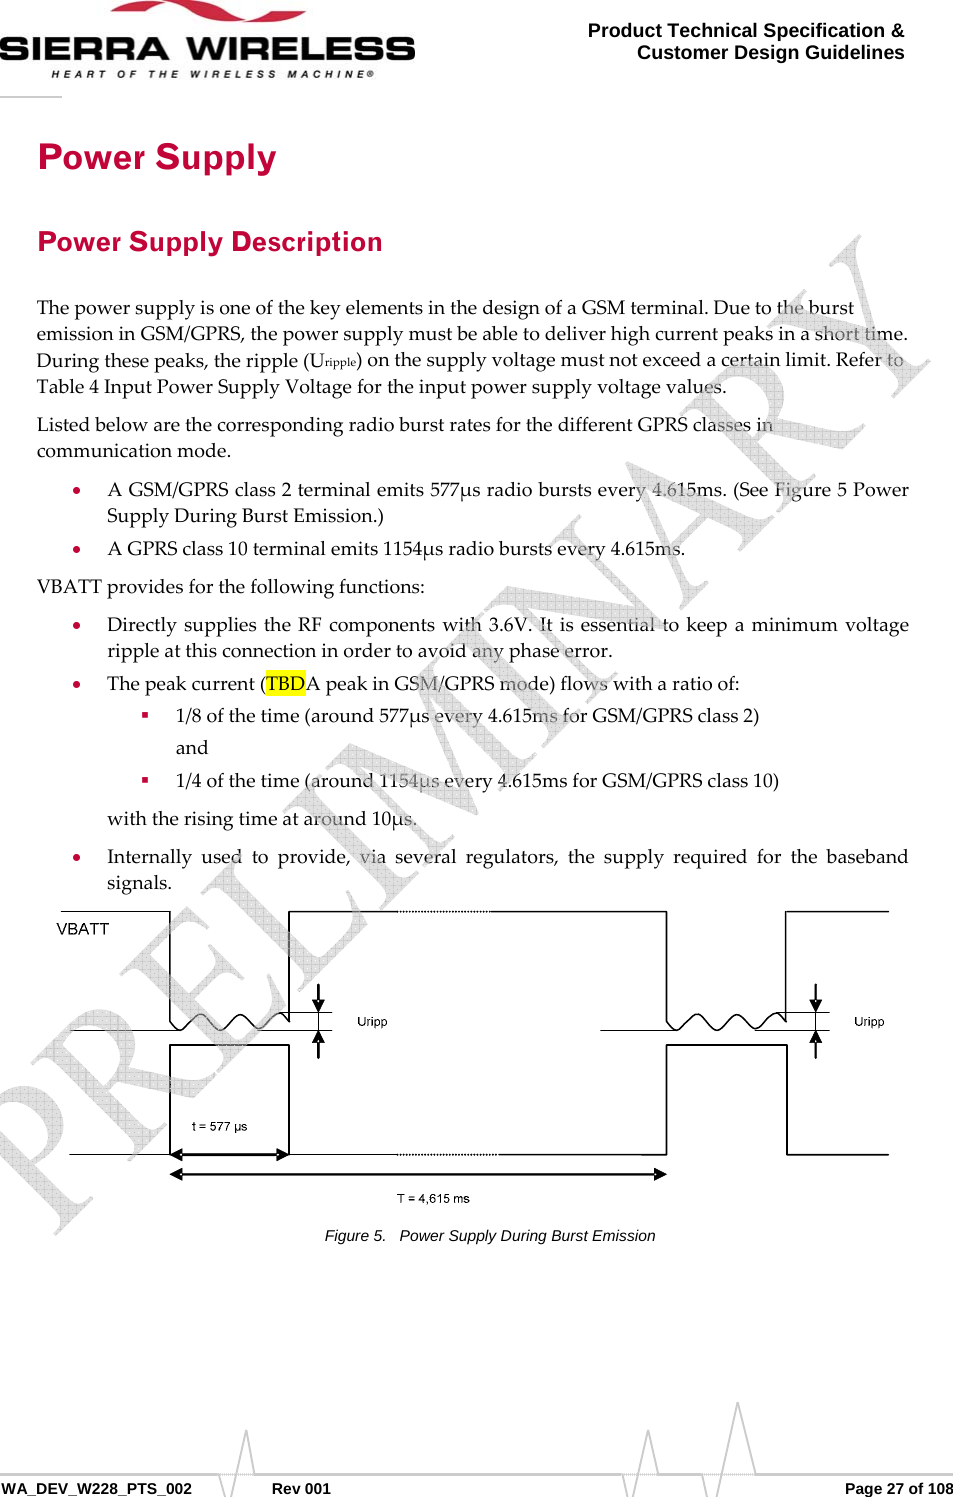      WA_DEV_W228_PTS_002 Rev 001  Page 27 of 108 Product Technical Specification &amp; Customer Design Guidelines Power Supply Power Supply Description ThepowersupplyisoneofthekeyelementsinthedesignofaGSMterminal.DuetotheburstemissioninGSM/GPRS,thepowersupplymustbeabletodeliverhighcurrentpeaksinashorttime.Duringthesepeaks,theripple(Uripple)onthesupplyvoltagemustnotexceedacertainlimit.RefertoTable4InputPowerSupplyVoltagefortheinputpowersupplyvoltagevalues.ListedbelowarethecorrespondingradioburstratesforthedifferentGPRSclassesincommunicationmode.• AGSM/GPRSclass2terminalemits577μsradioburstsevery4.615ms.(SeeFigure5PowerSupplyDuringBurstEmission.)• AGPRSclass10terminalemits1154μsradioburstsevery4.615ms.VBATTprovidesforthefollowingfunctions:• DirectlysuppliestheRFcomponentswith3.6V.Itisessentialtokeepaminimumvoltagerippleatthisconnectioninordertoavoidanyphaseerror.• Thepeakcurrent(TBDApeakinGSM/GPRSmode)flowswitharatioof: 1/8ofthetime(around577μsevery4.615msforGSM/GPRSclass2)and 1/4ofthetime(around1154μsevery4.615msforGSM/GPRSclass10)withtherisingtimeataround10μs.• Internallyusedtoprovide,viaseveralregulators,thesupplyrequiredforthebasebandsignals.Figure 5.  Power Supply During Burst Emission    